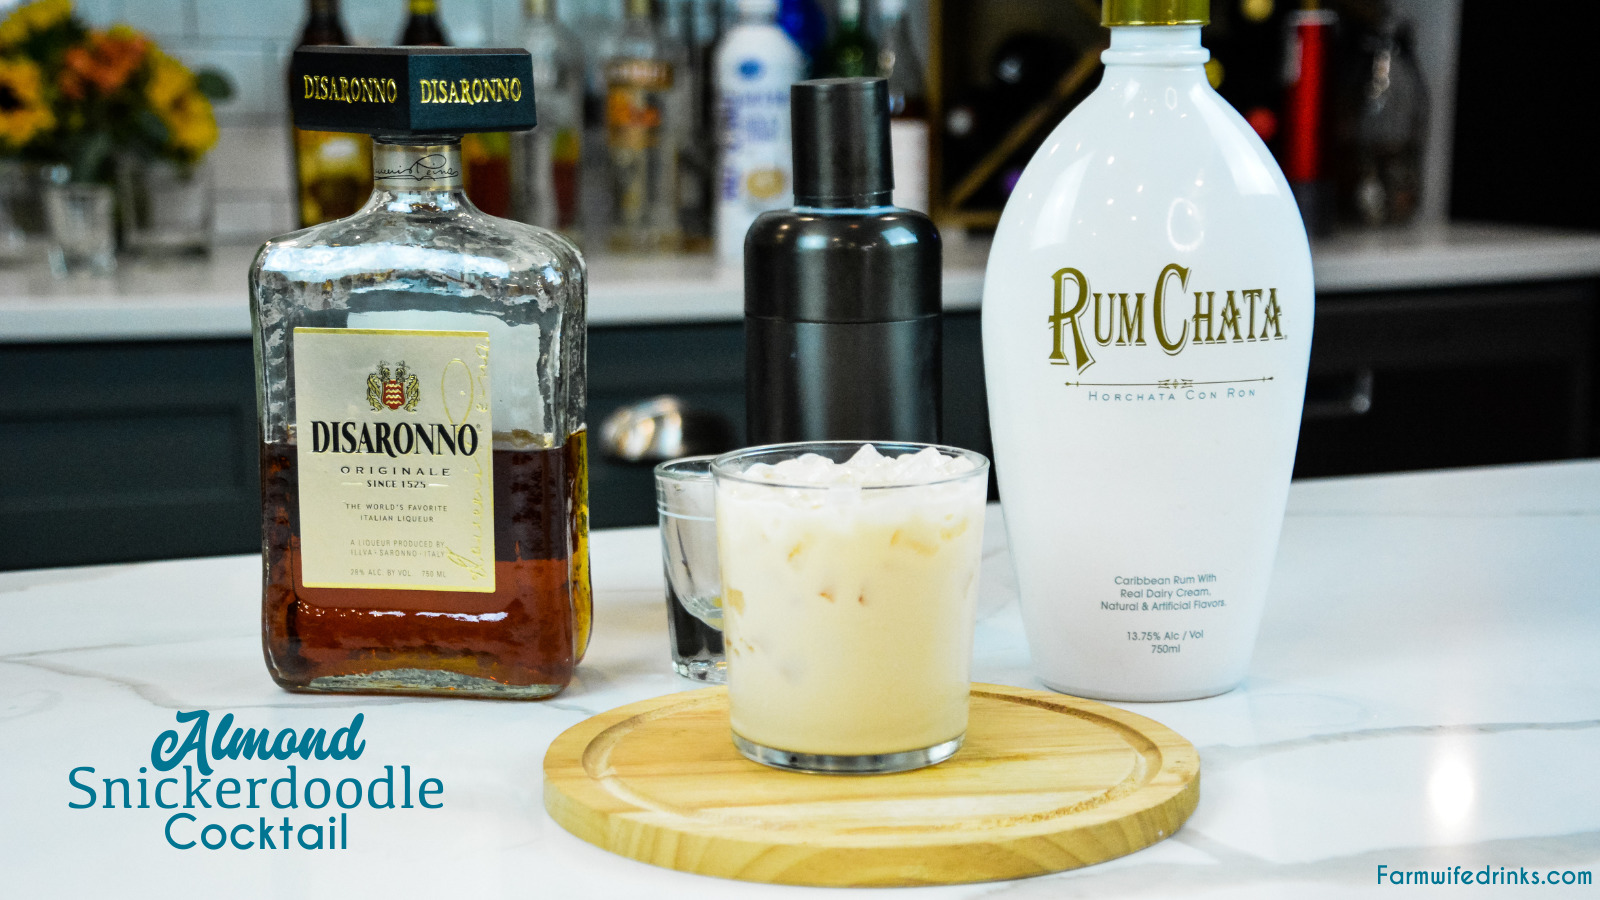 Almond snickerdoodle cocktail is the smooth almond and cinnamon after dinner drink that is made by shaking Rumchata and amaretto together and then serving over ice.